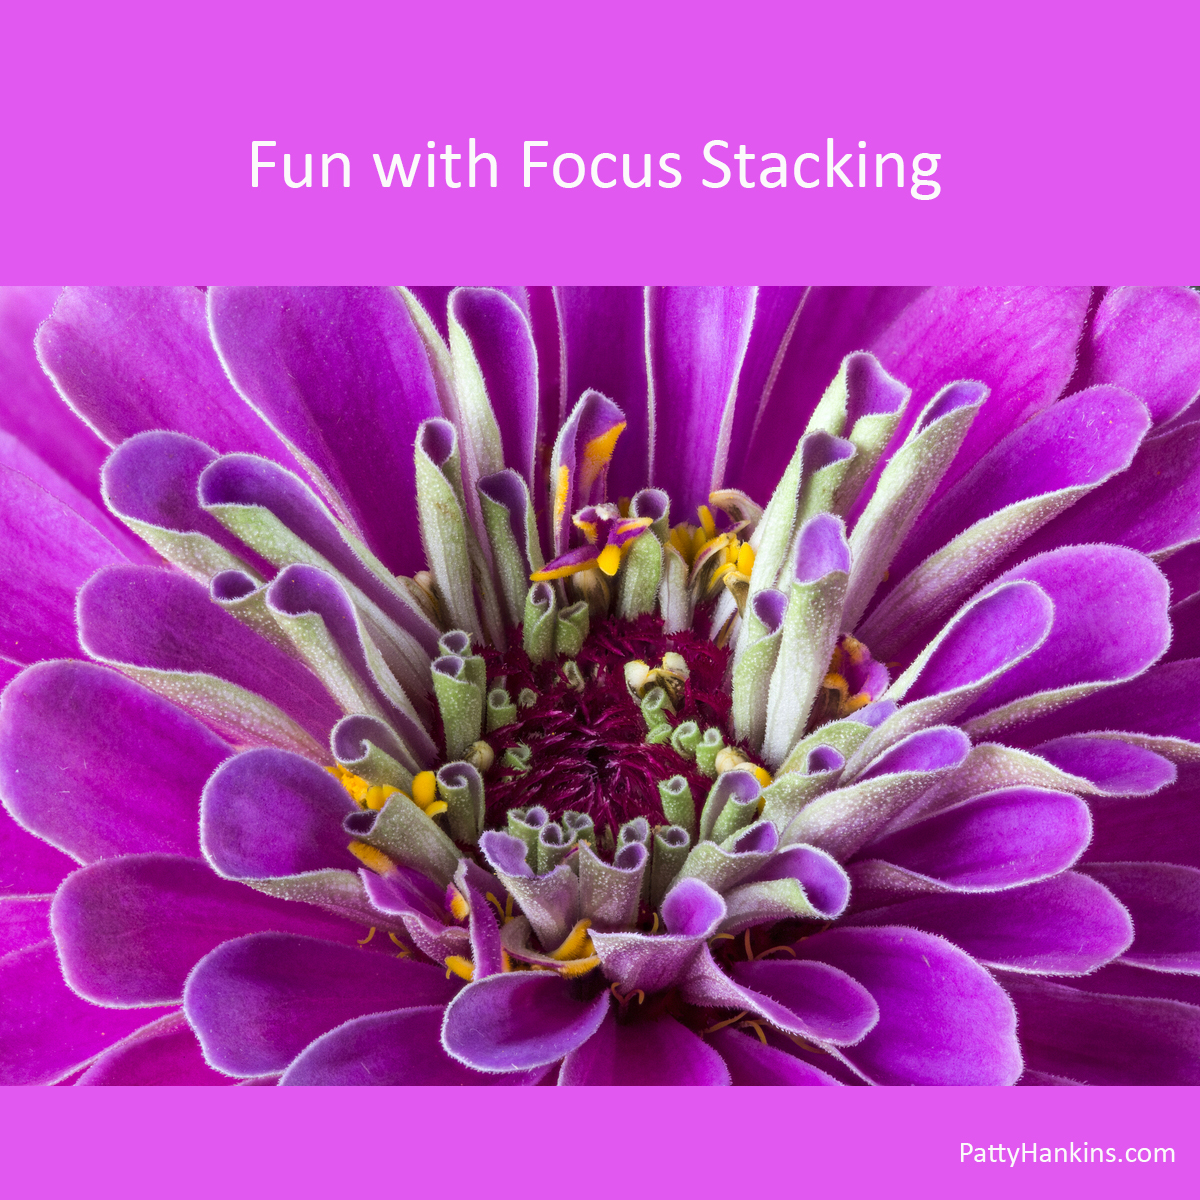 Fun with Focus Stacking